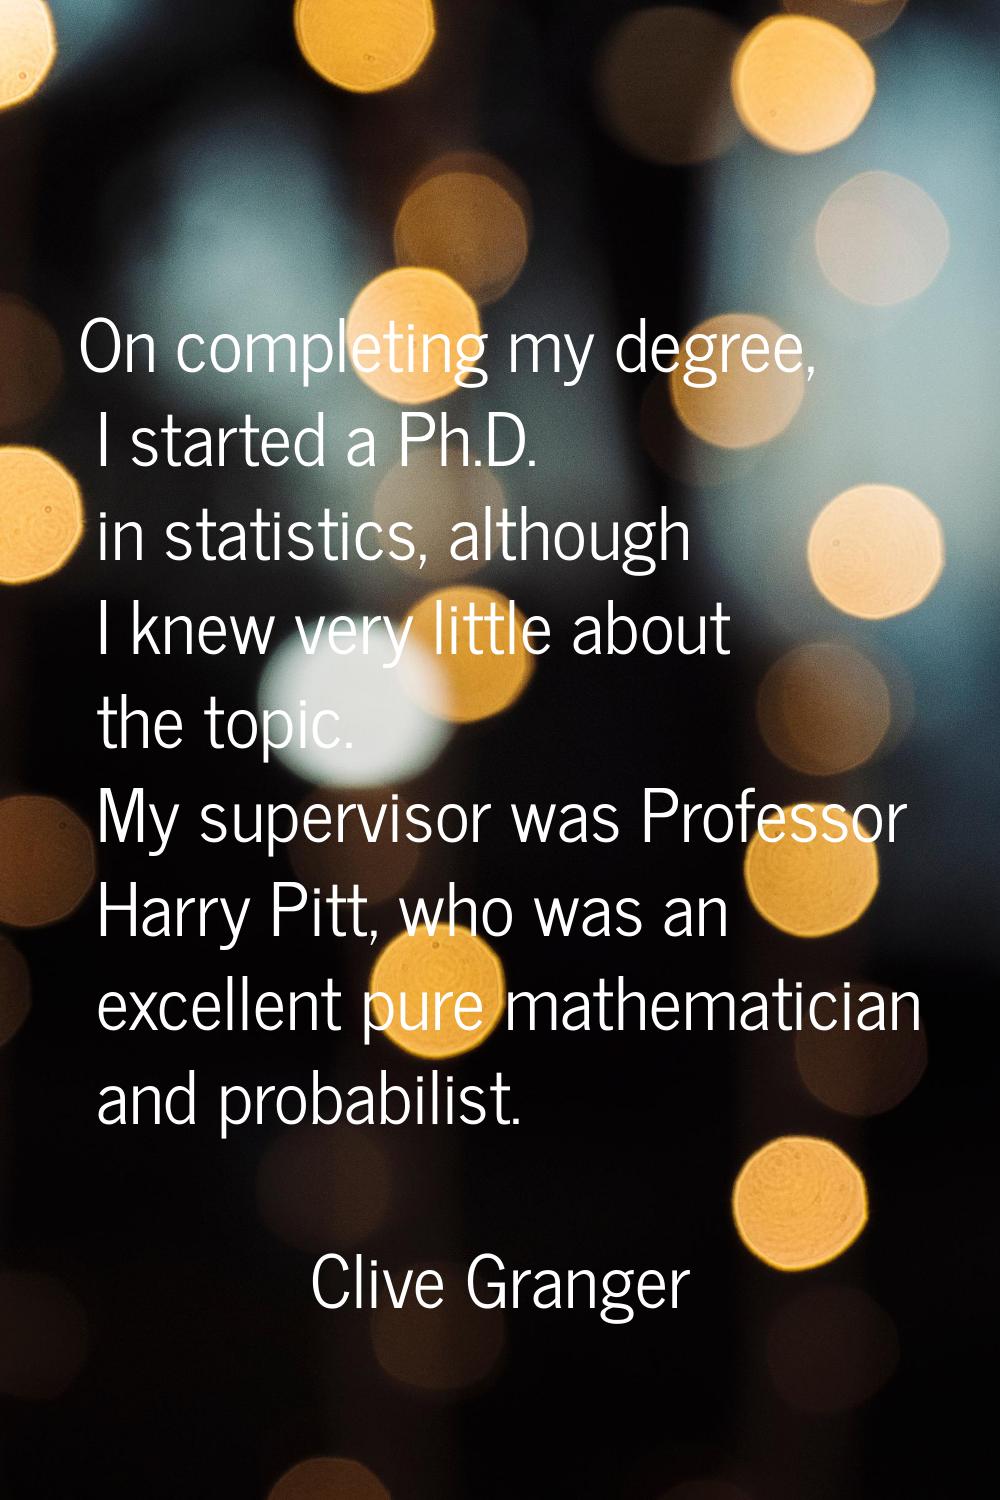 On completing my degree, I started a Ph.D. in statistics, although I knew very little about the top